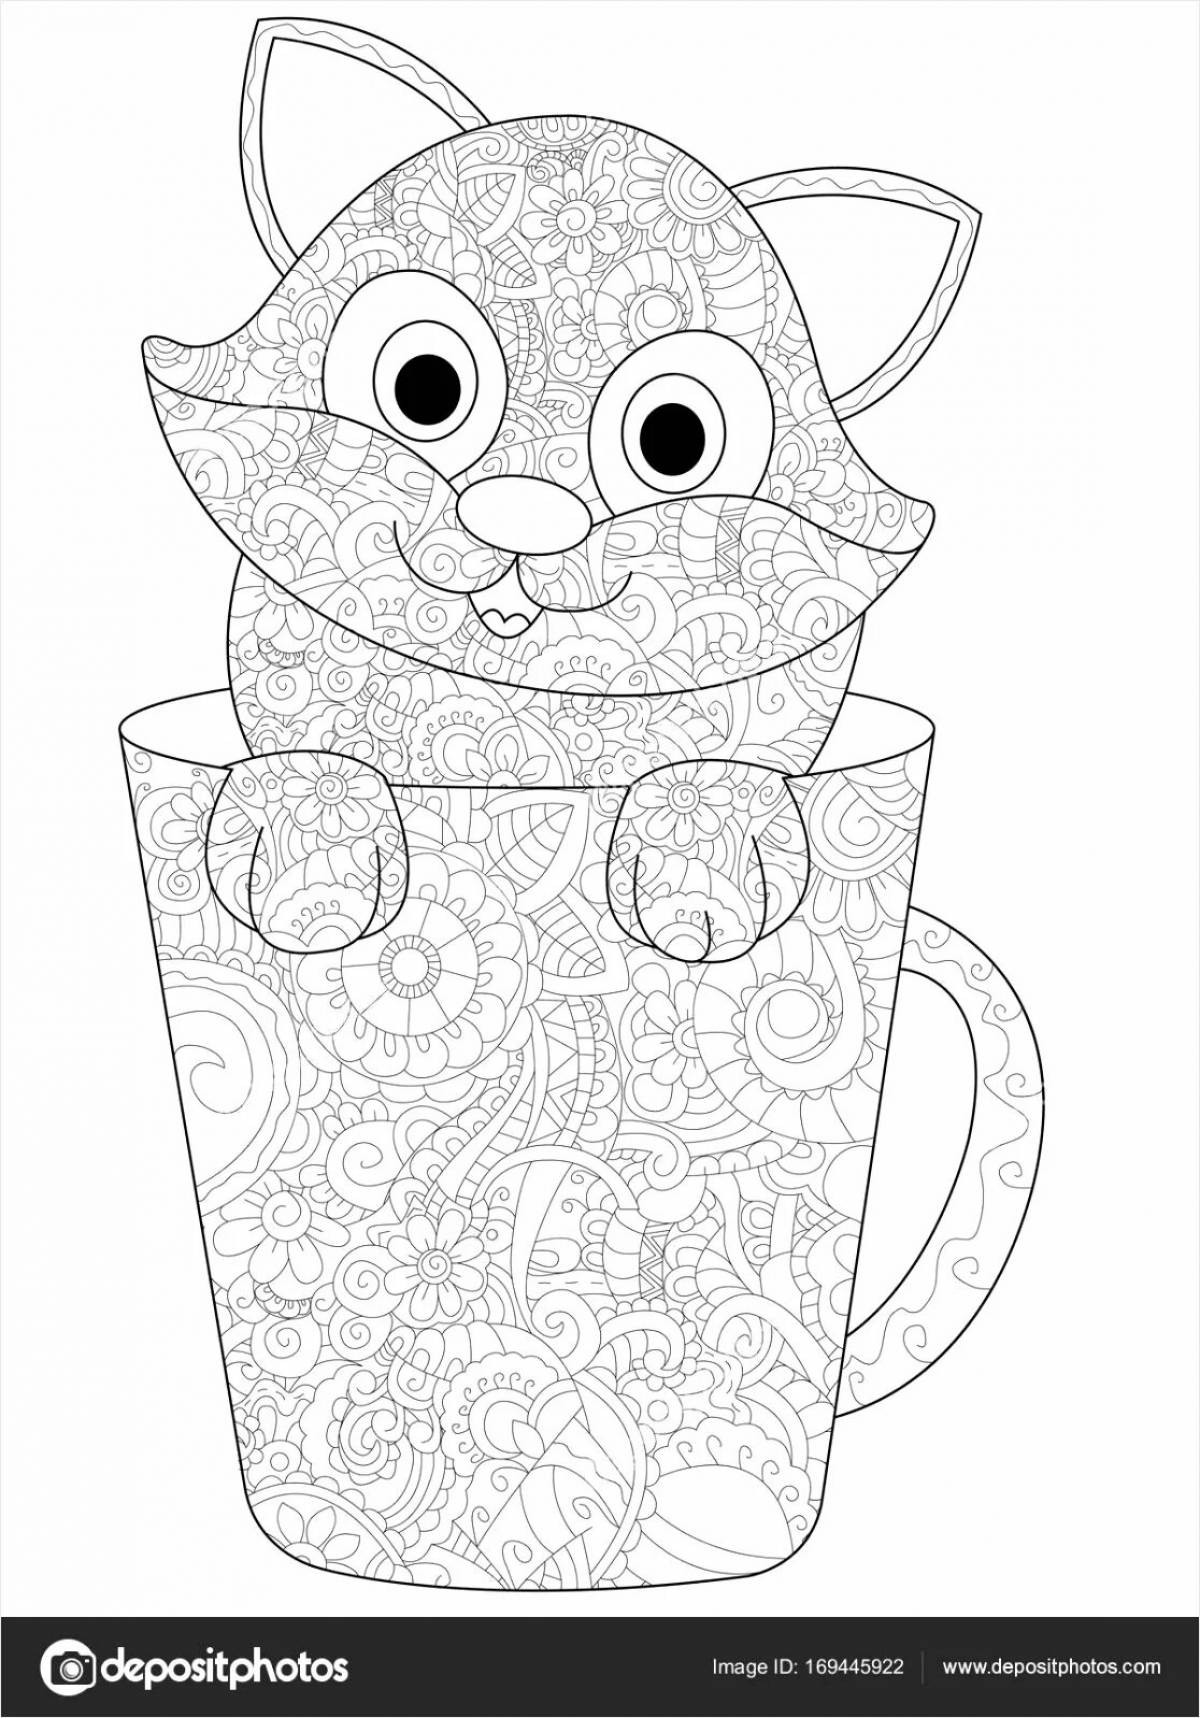 Frightened cat in a cup coloring page